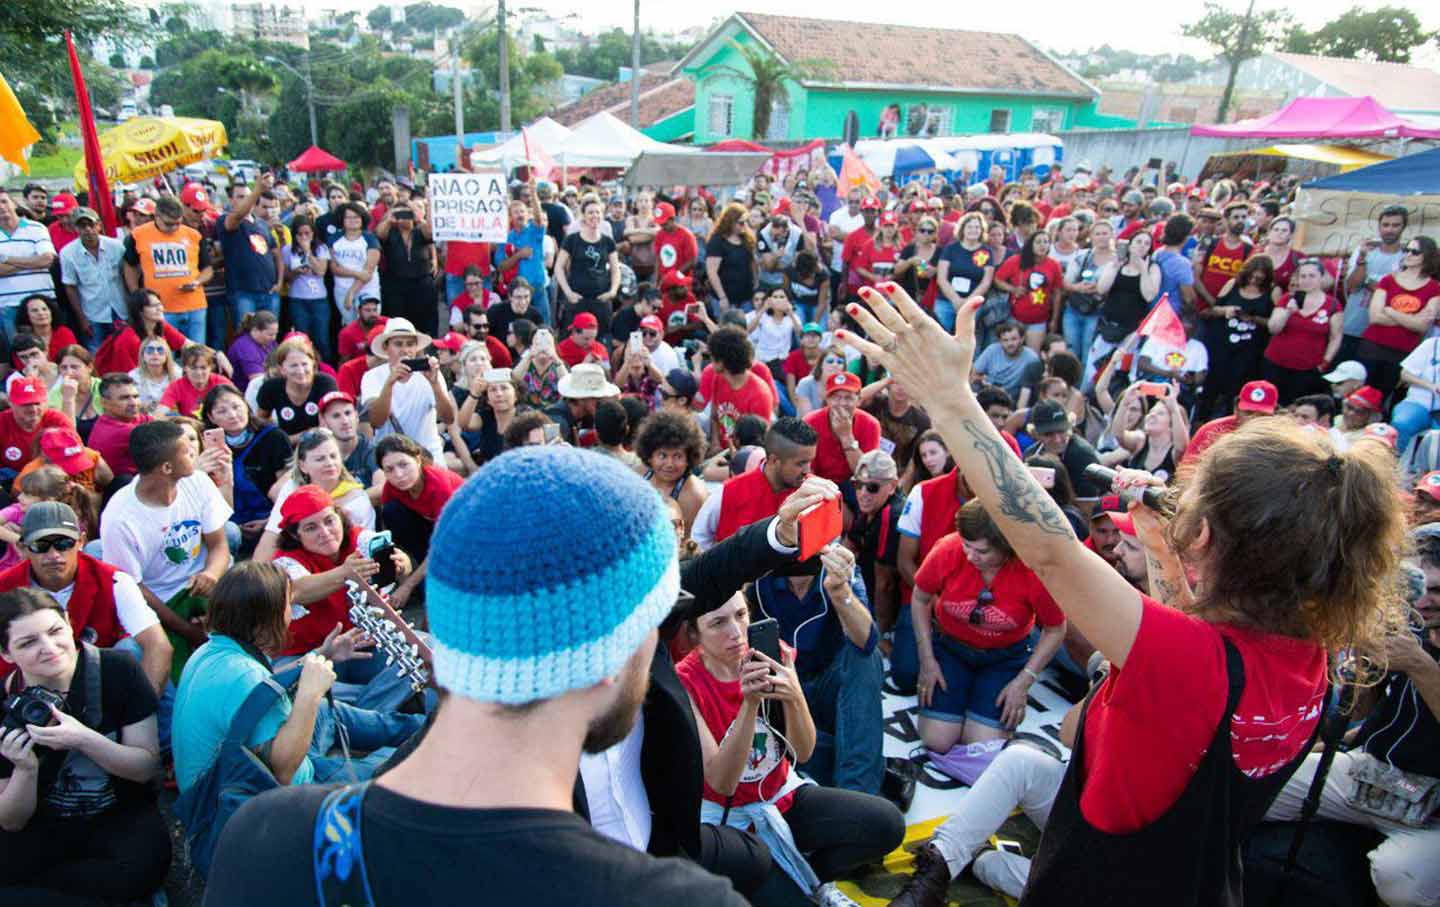 MST LETTER TO THE BRAZILIAN PEOPLE: For urgent changes! In defense